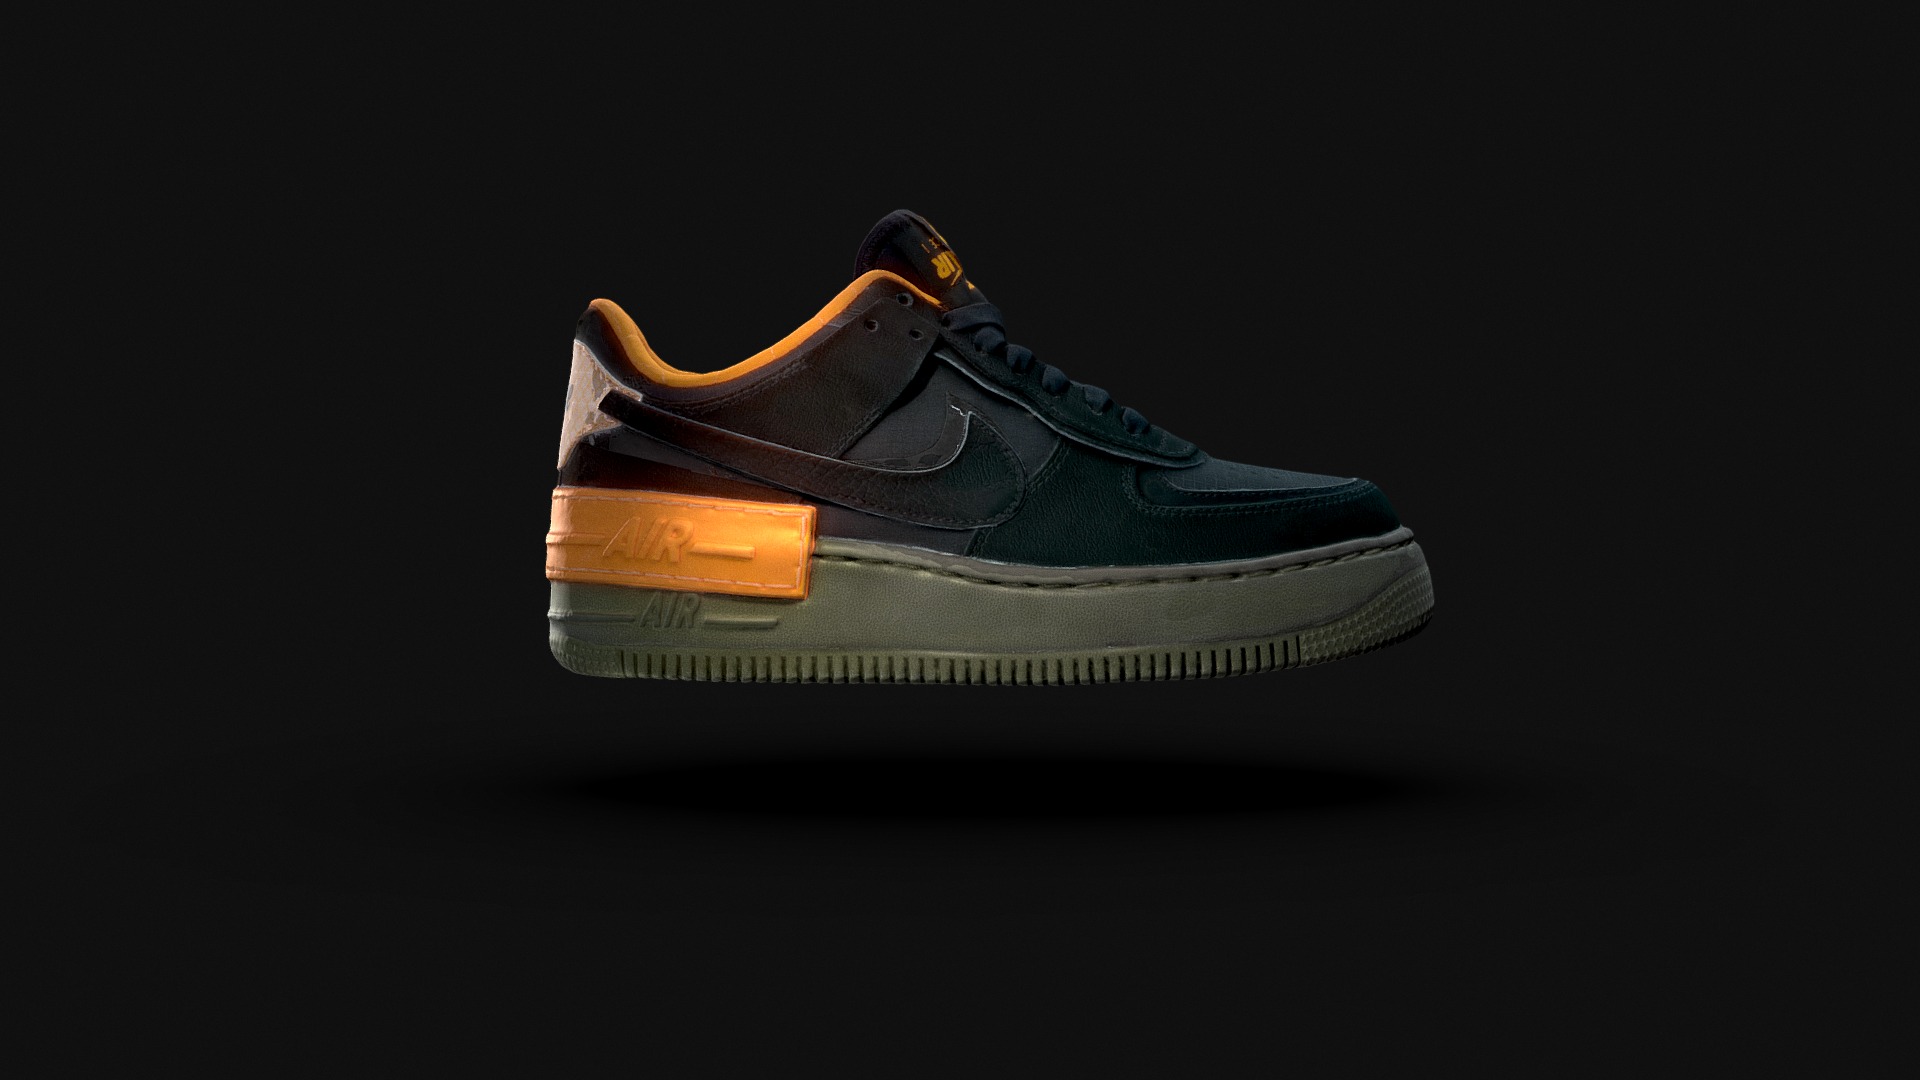 3D model Nike Air Force 1 Shadow - This is a 3D model of the Nike Air Force 1 Shadow. The 3D model is about a shoe on a black background.